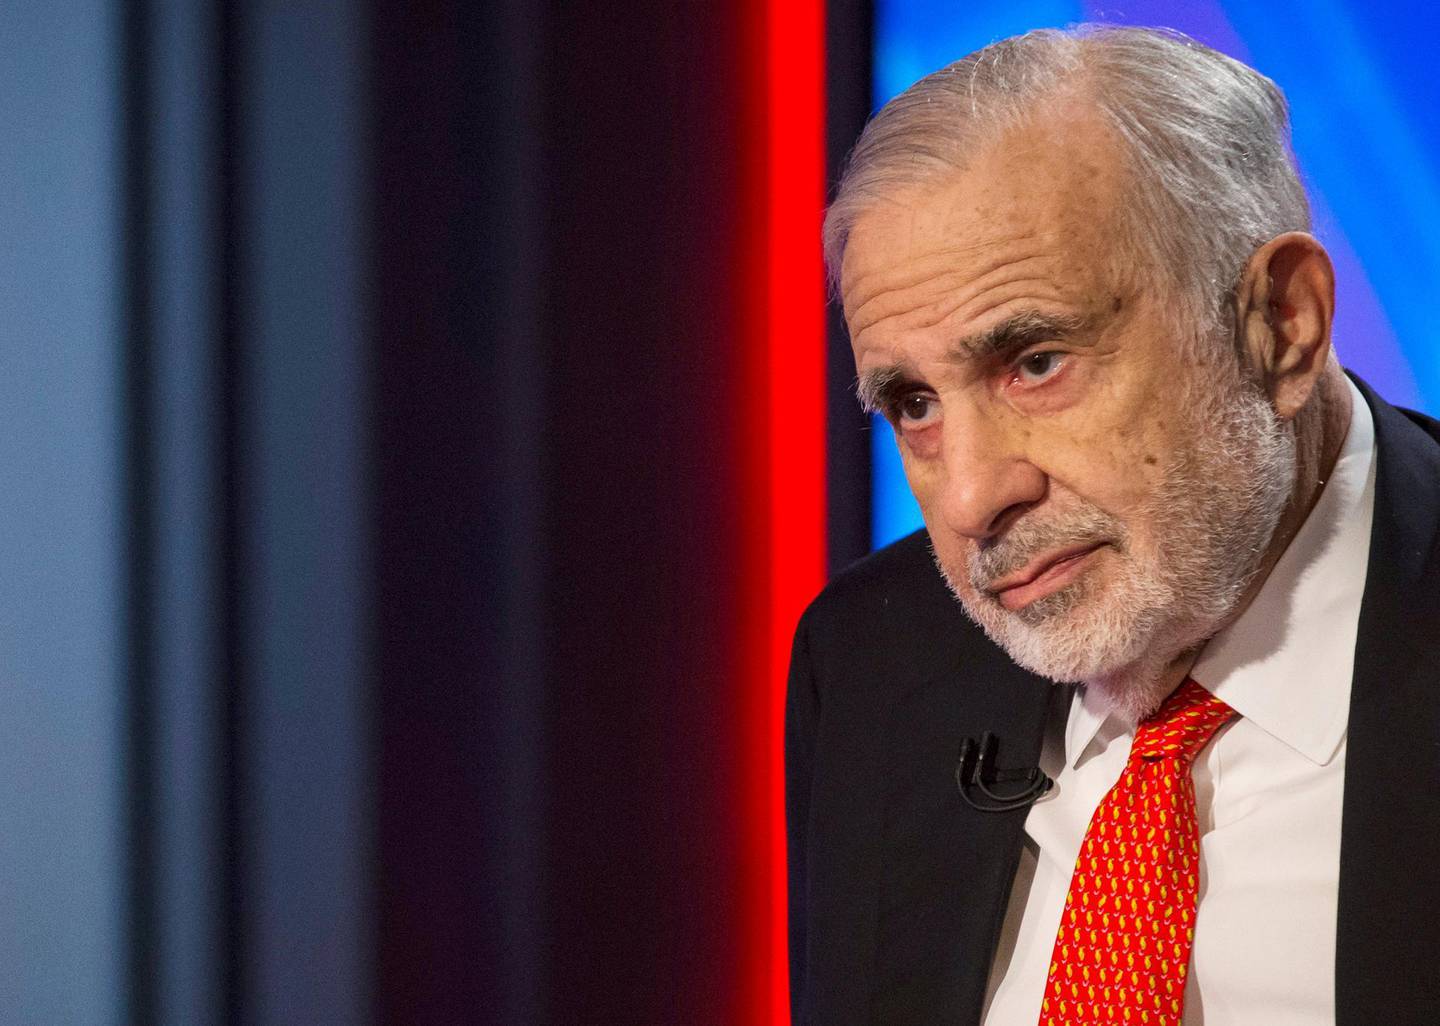 FILE PHOTO: Billionaire activist-investor Carl Icahn gives an interview on FOX Business Network's Neil Cavuto show in New York, U.S.,  February 11, 2014.   REUTERS/Brendan McDermid/File Photo